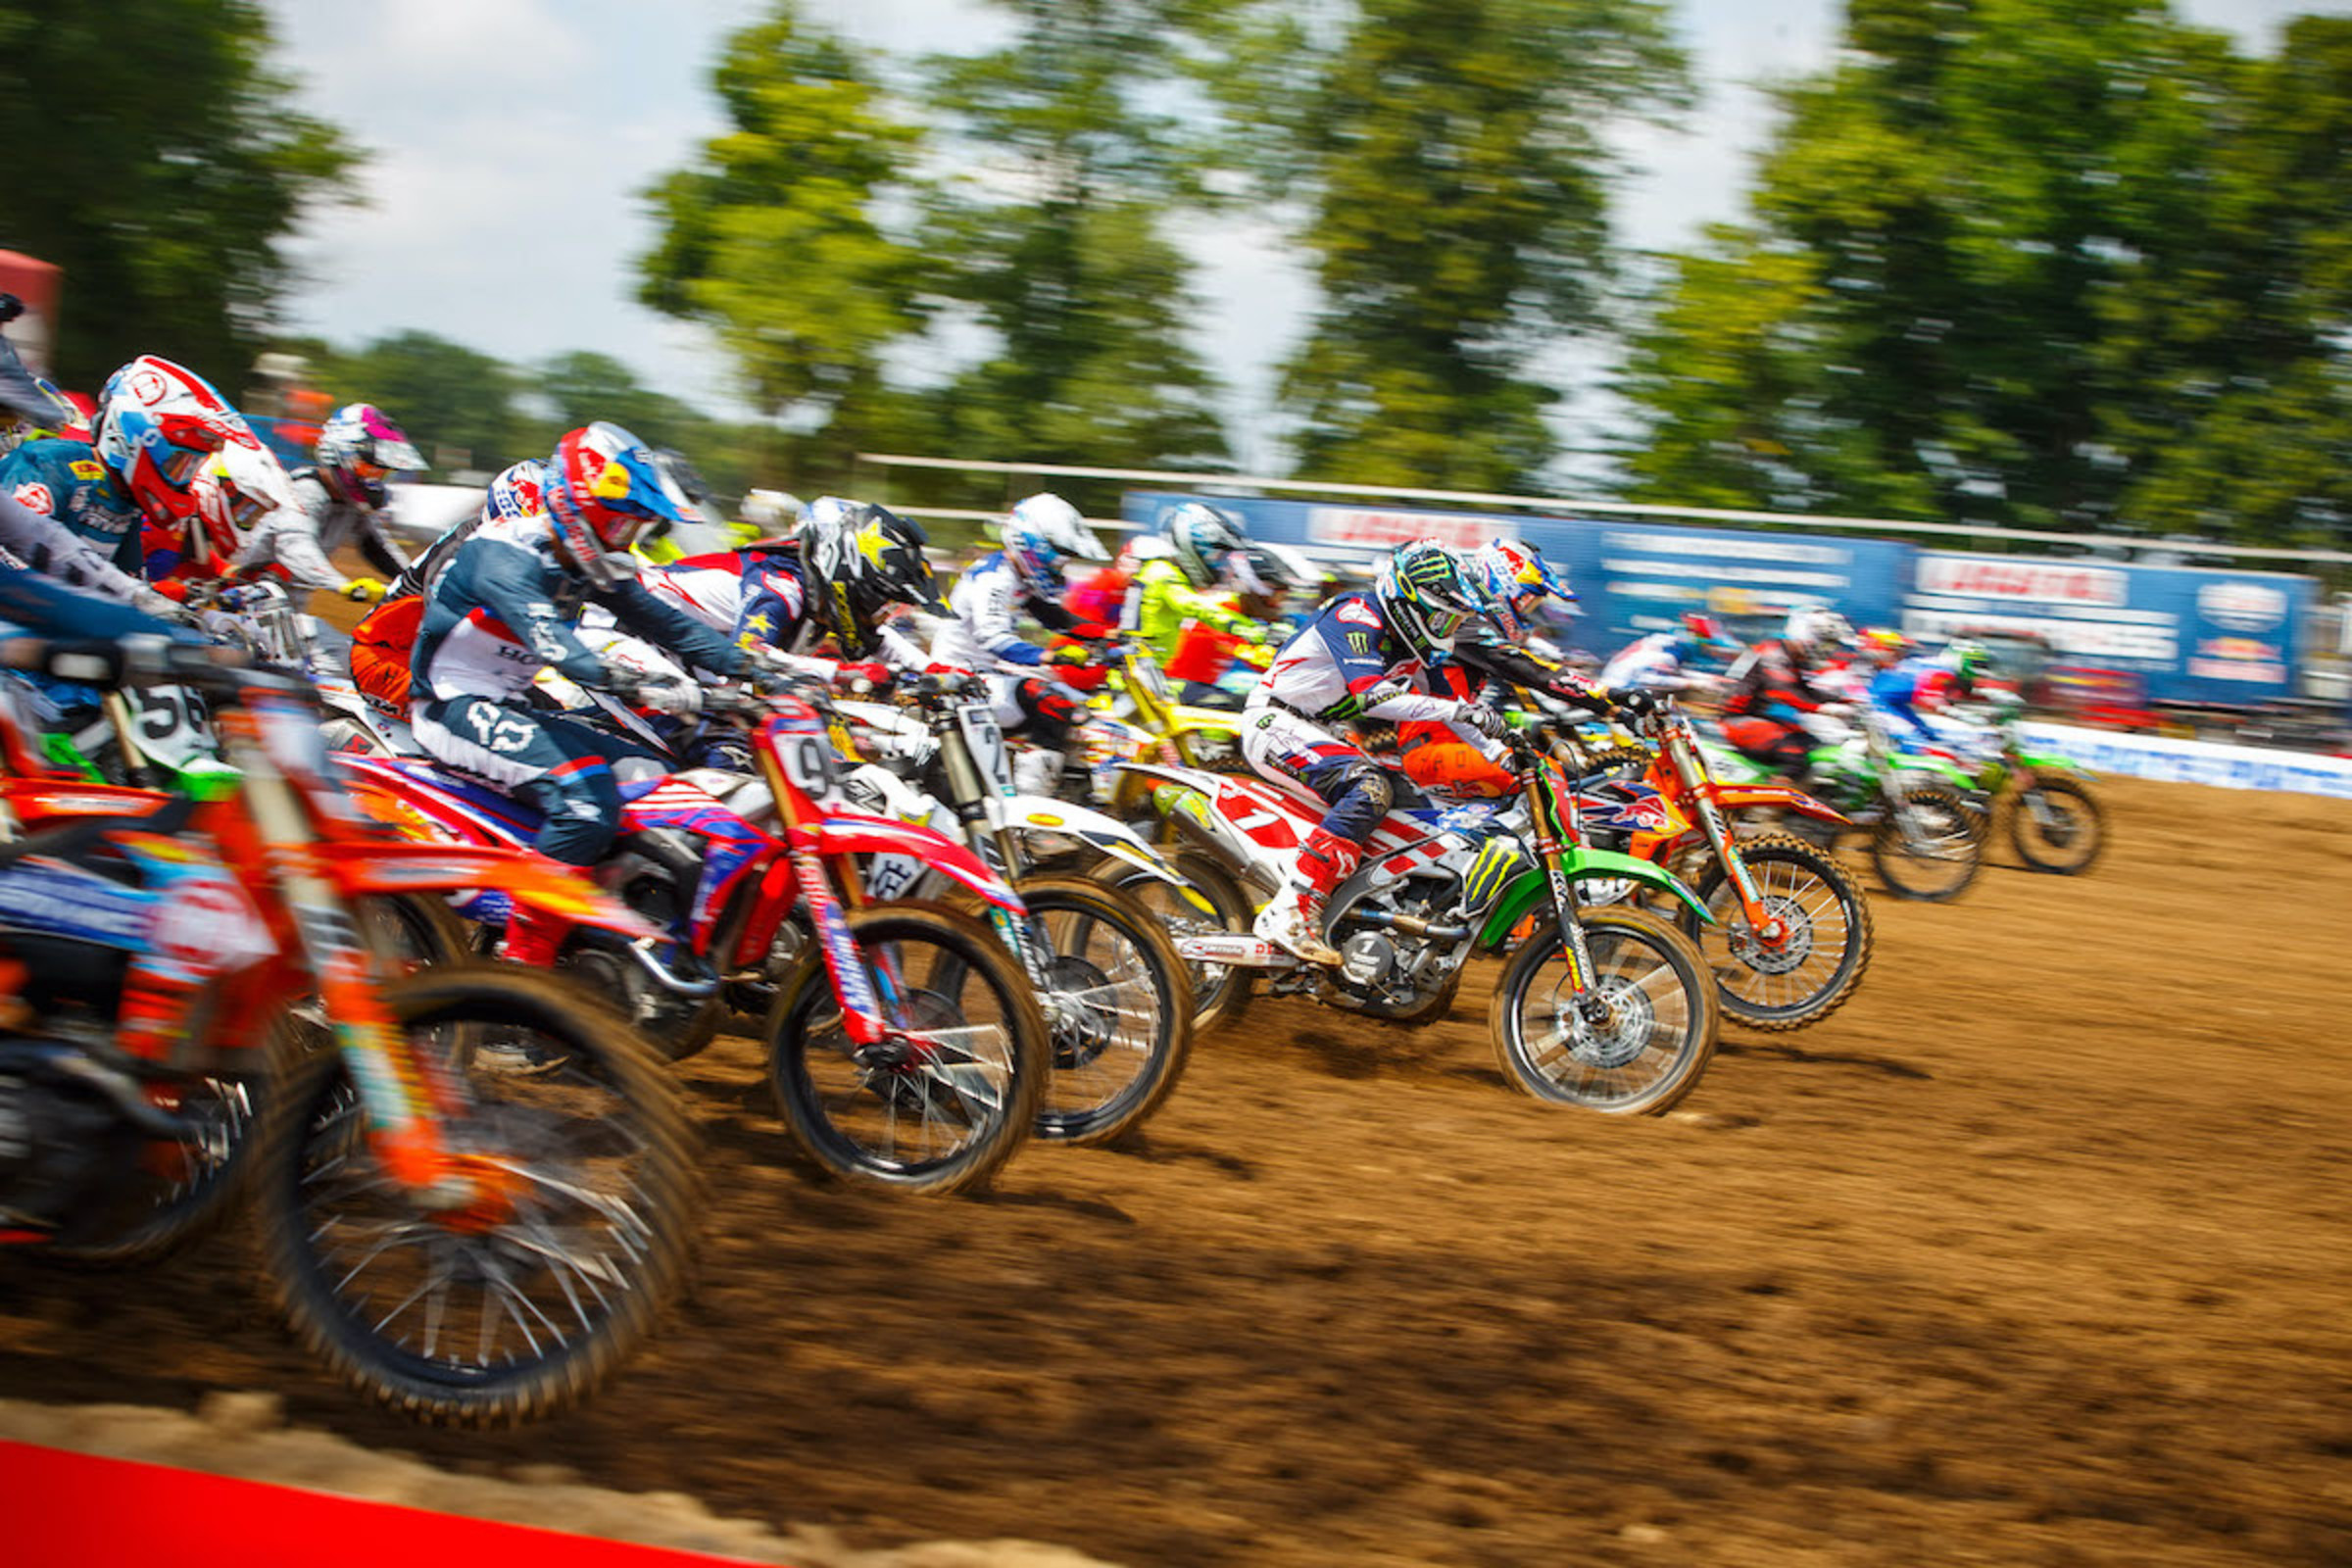 Free Official Pro Motocross Mobile Live Timing App Introduced